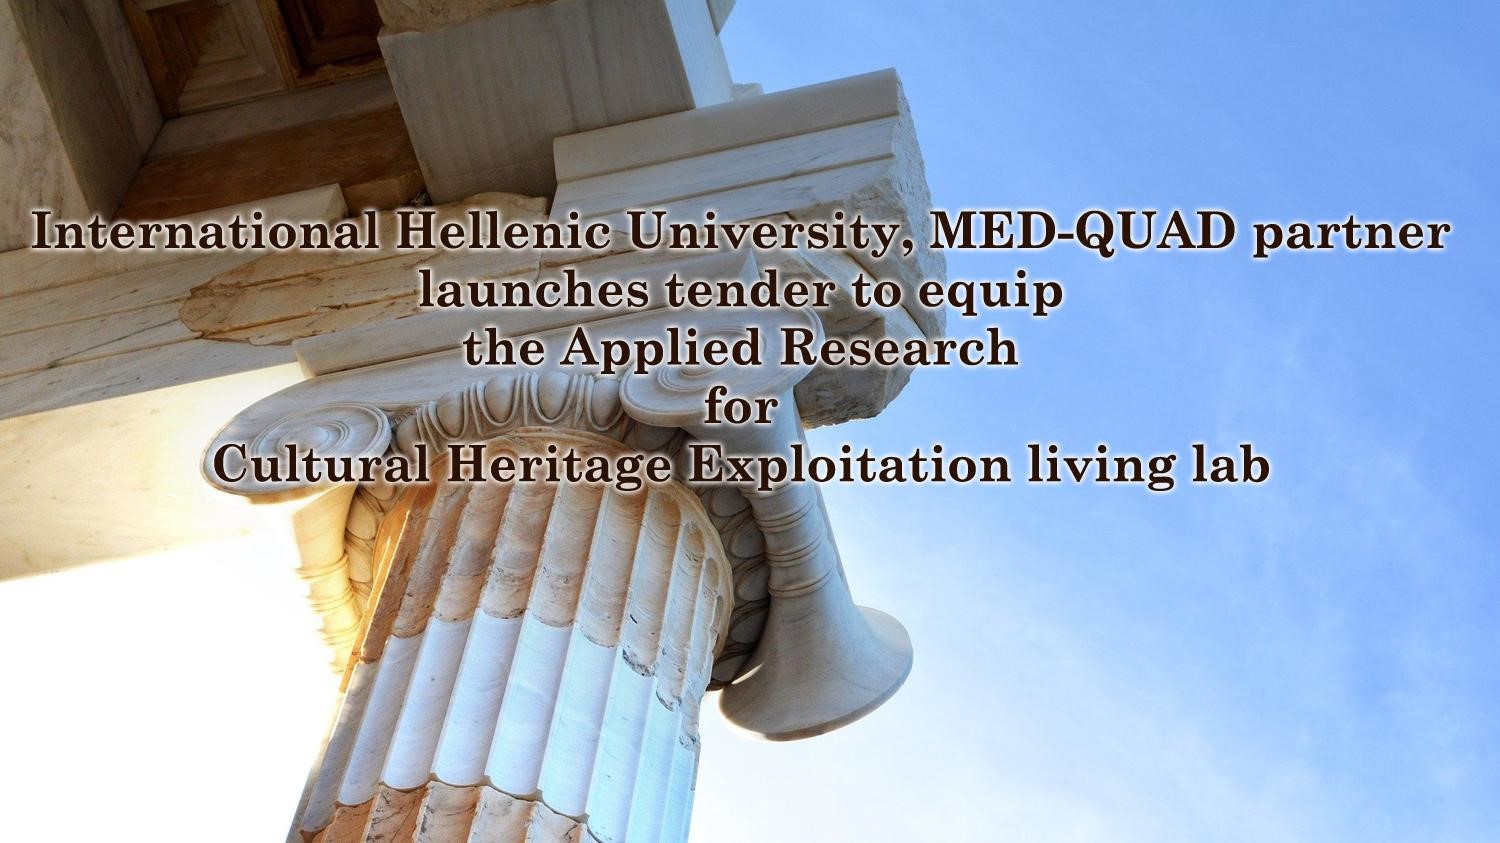 MED-QUAD in Greece is bidding to equip the Applied Research for Cultural Heritage Exploitation living lab